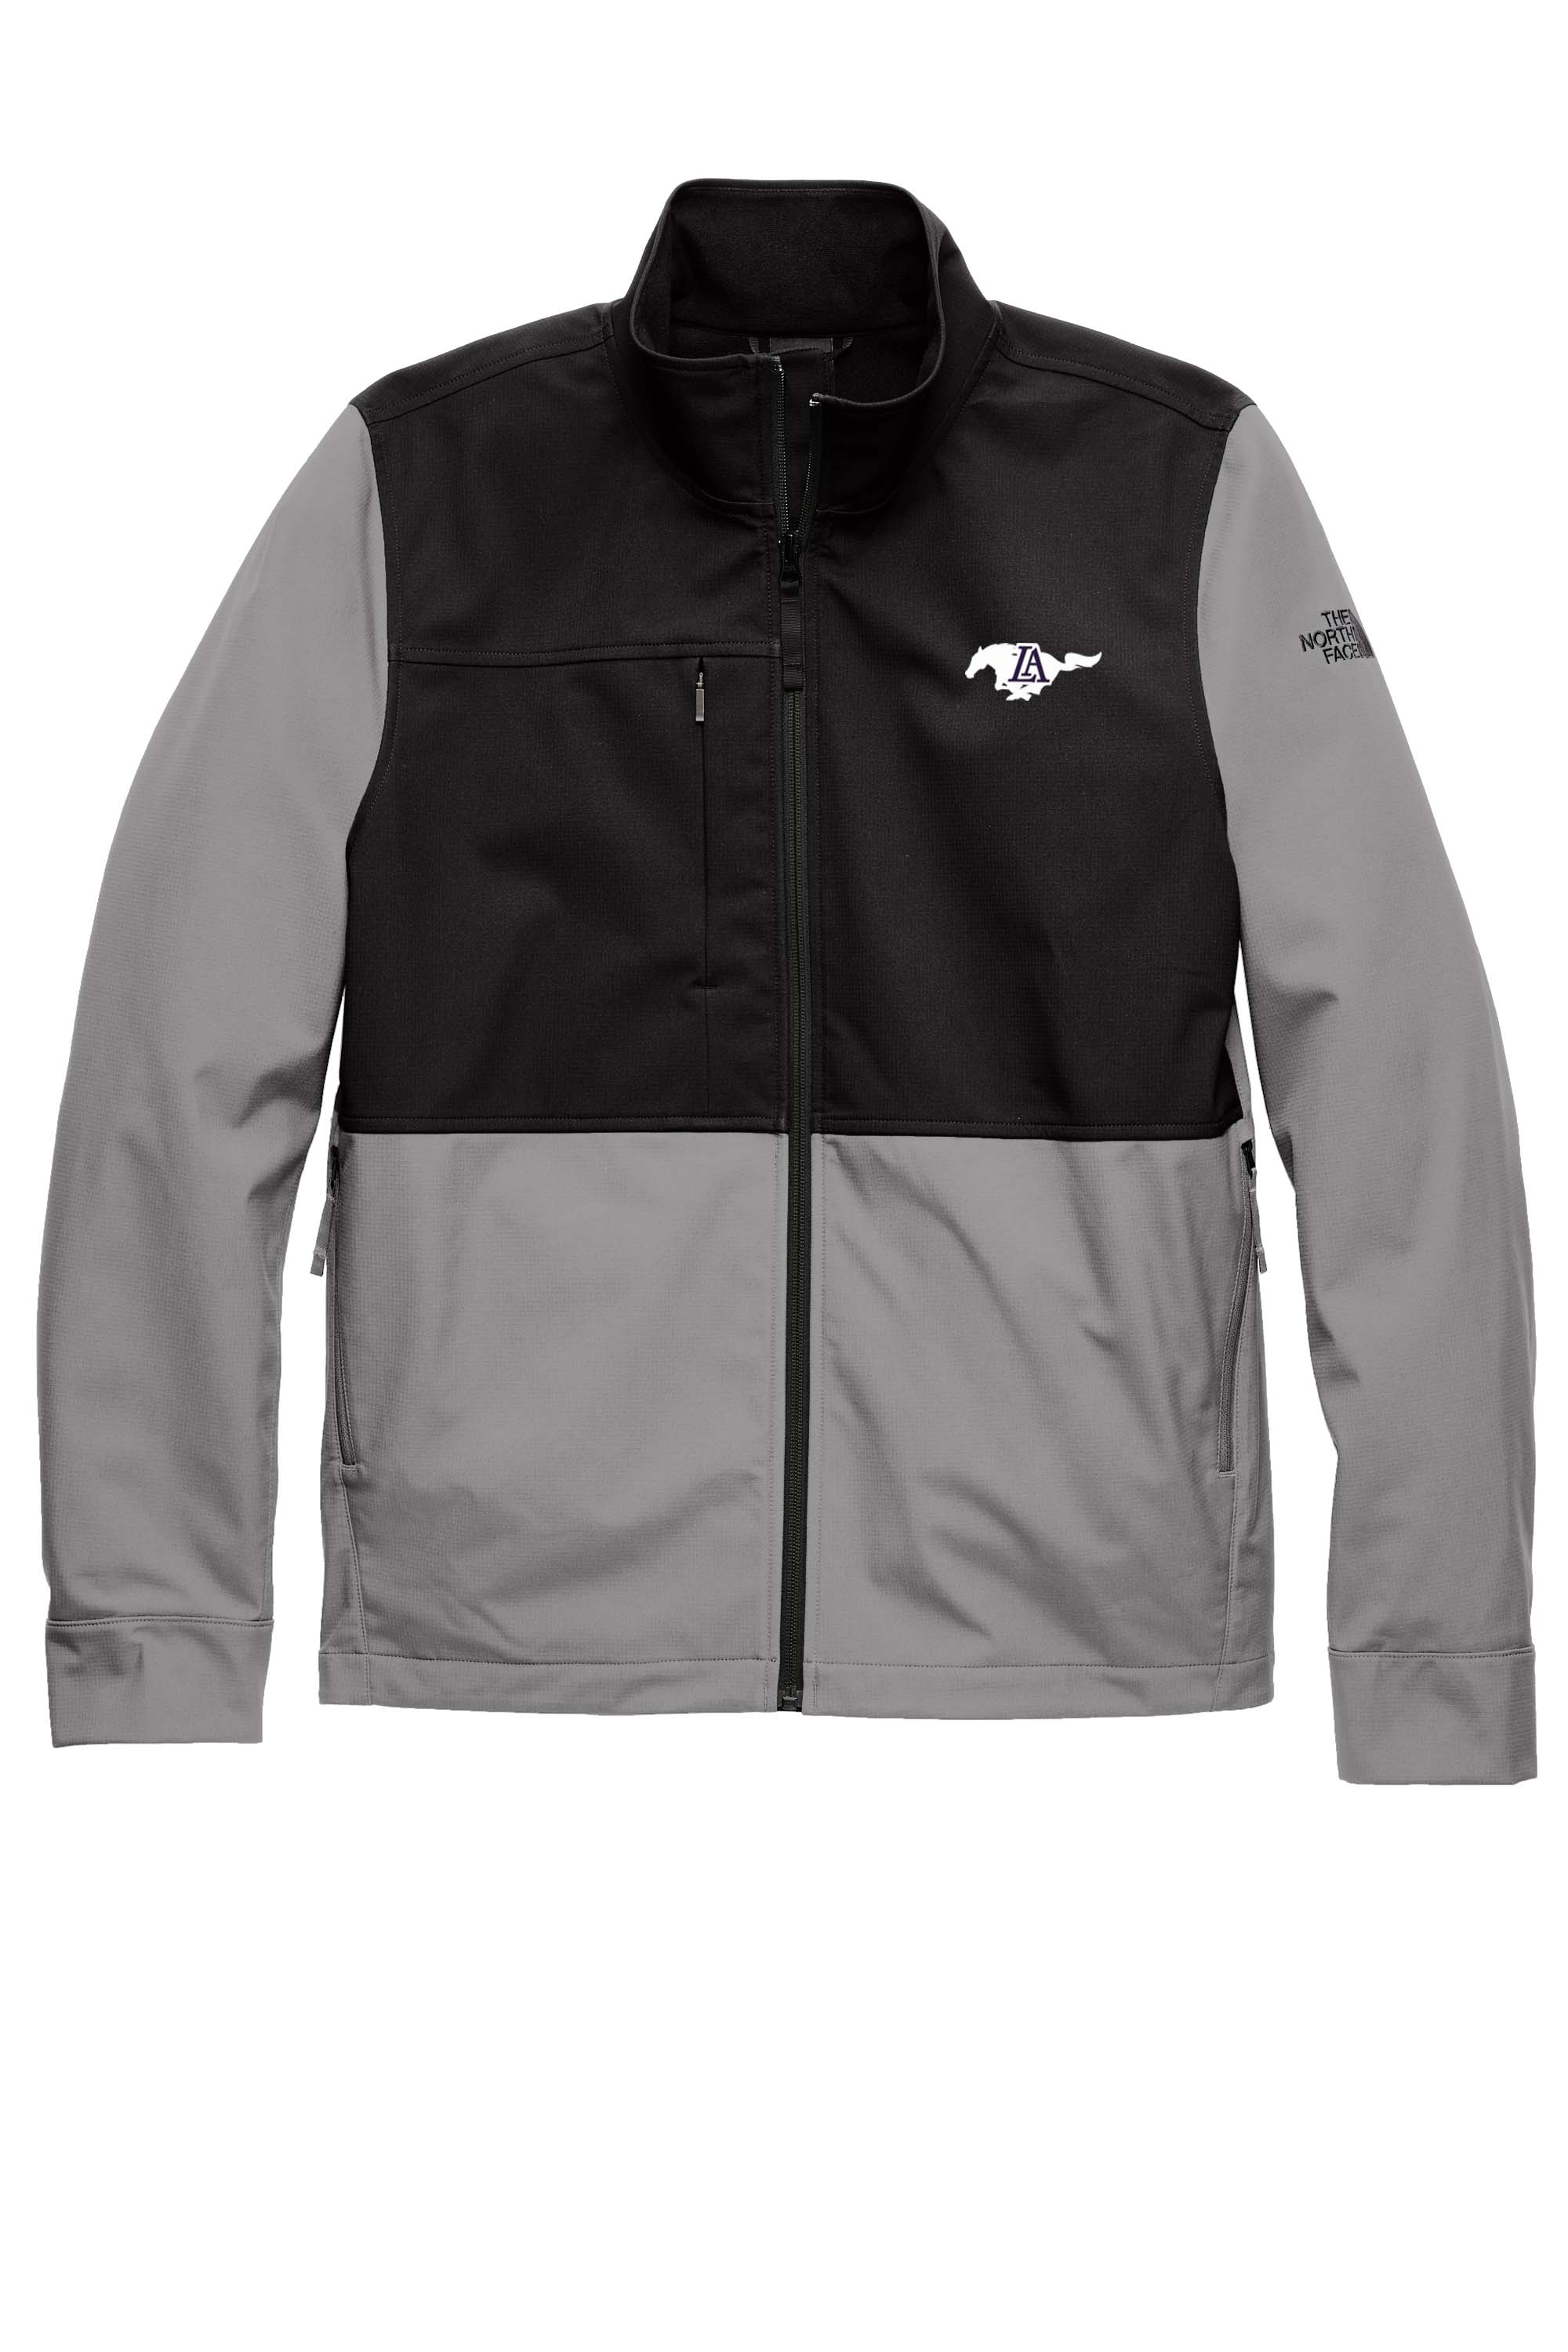 The North Face Castle Rock Soft Shell Jacket